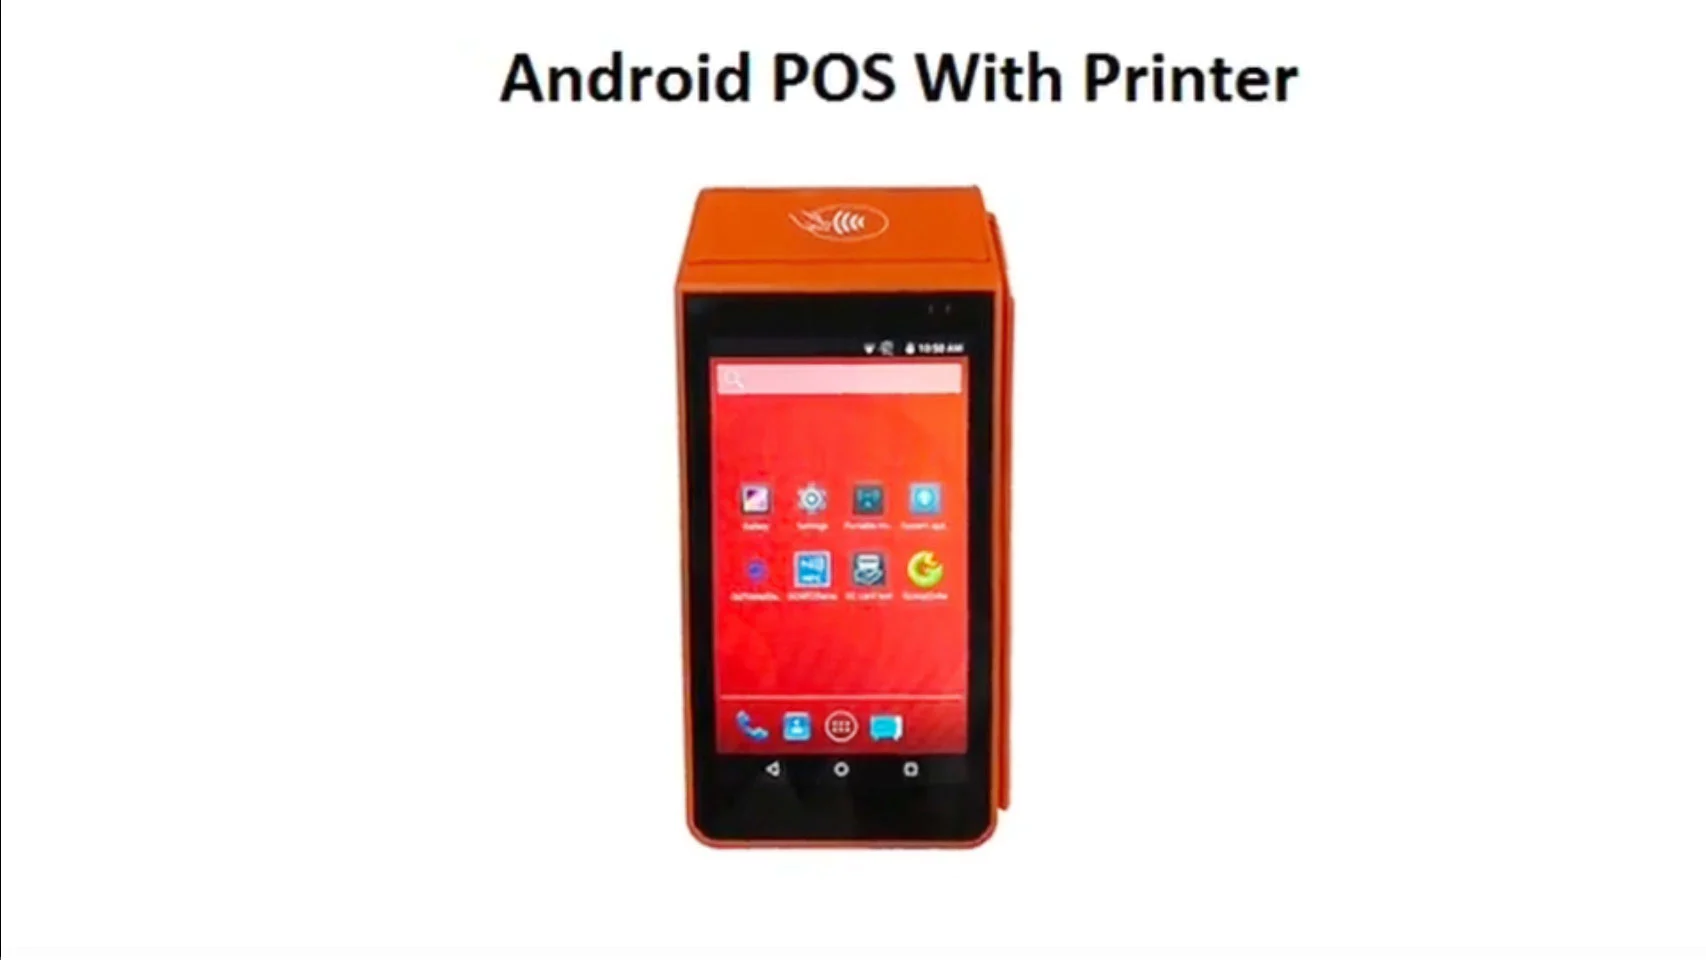 Android Pos with Printer, nfc, magnetic smart card reader